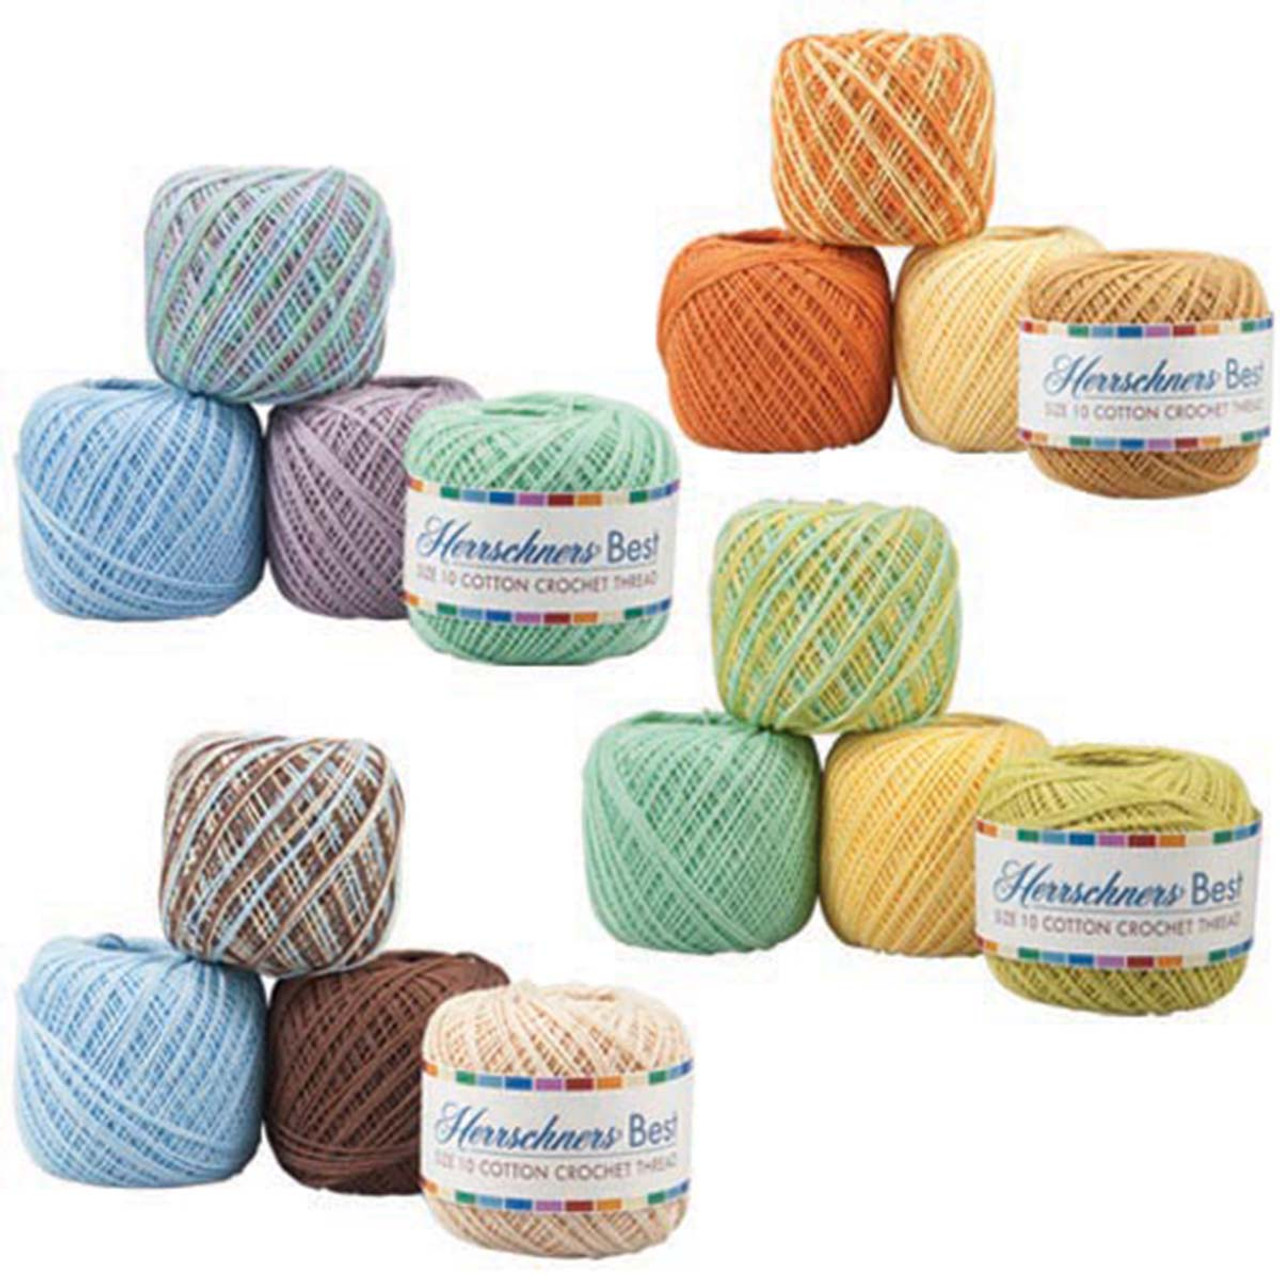 Herrschners Best Color-Coordinated Value Pack - Crochet Thread